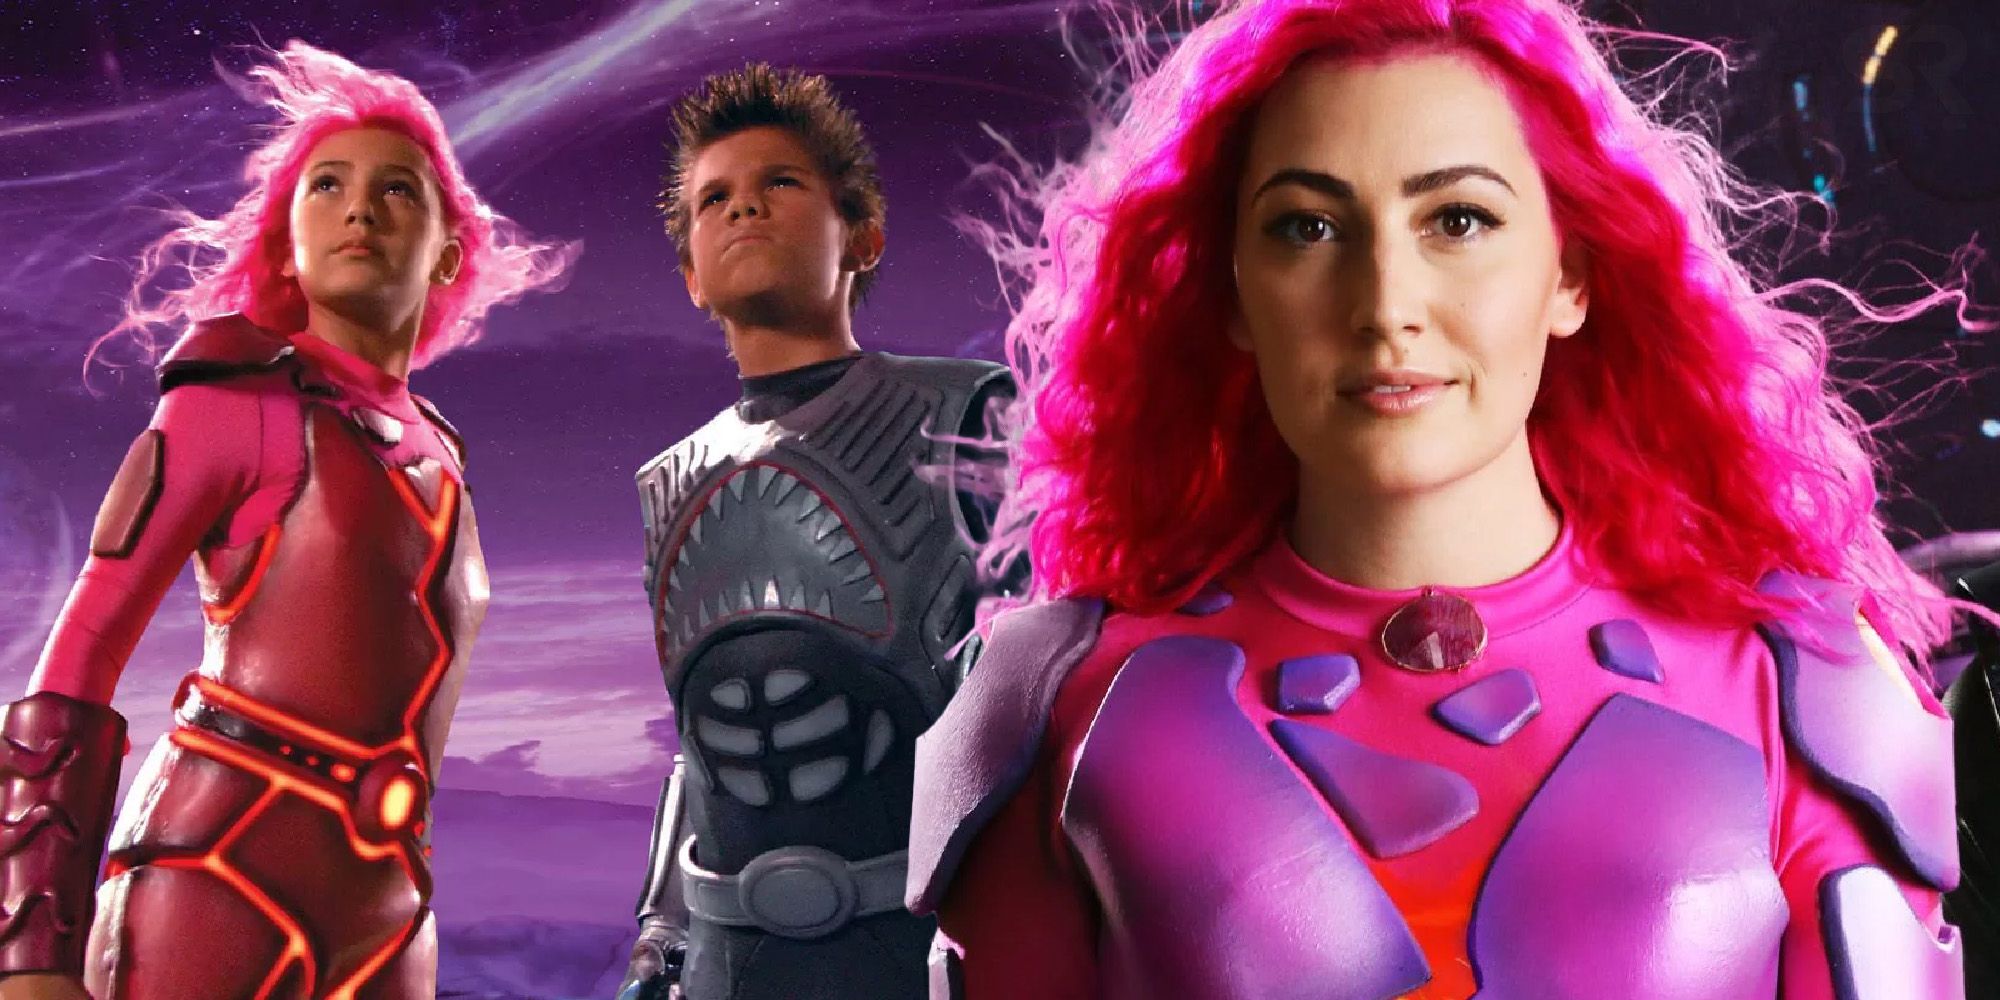 Will We Can Be Heroes 2 (Or Another Sharkboy & Lavagirl Movie) Happen? 